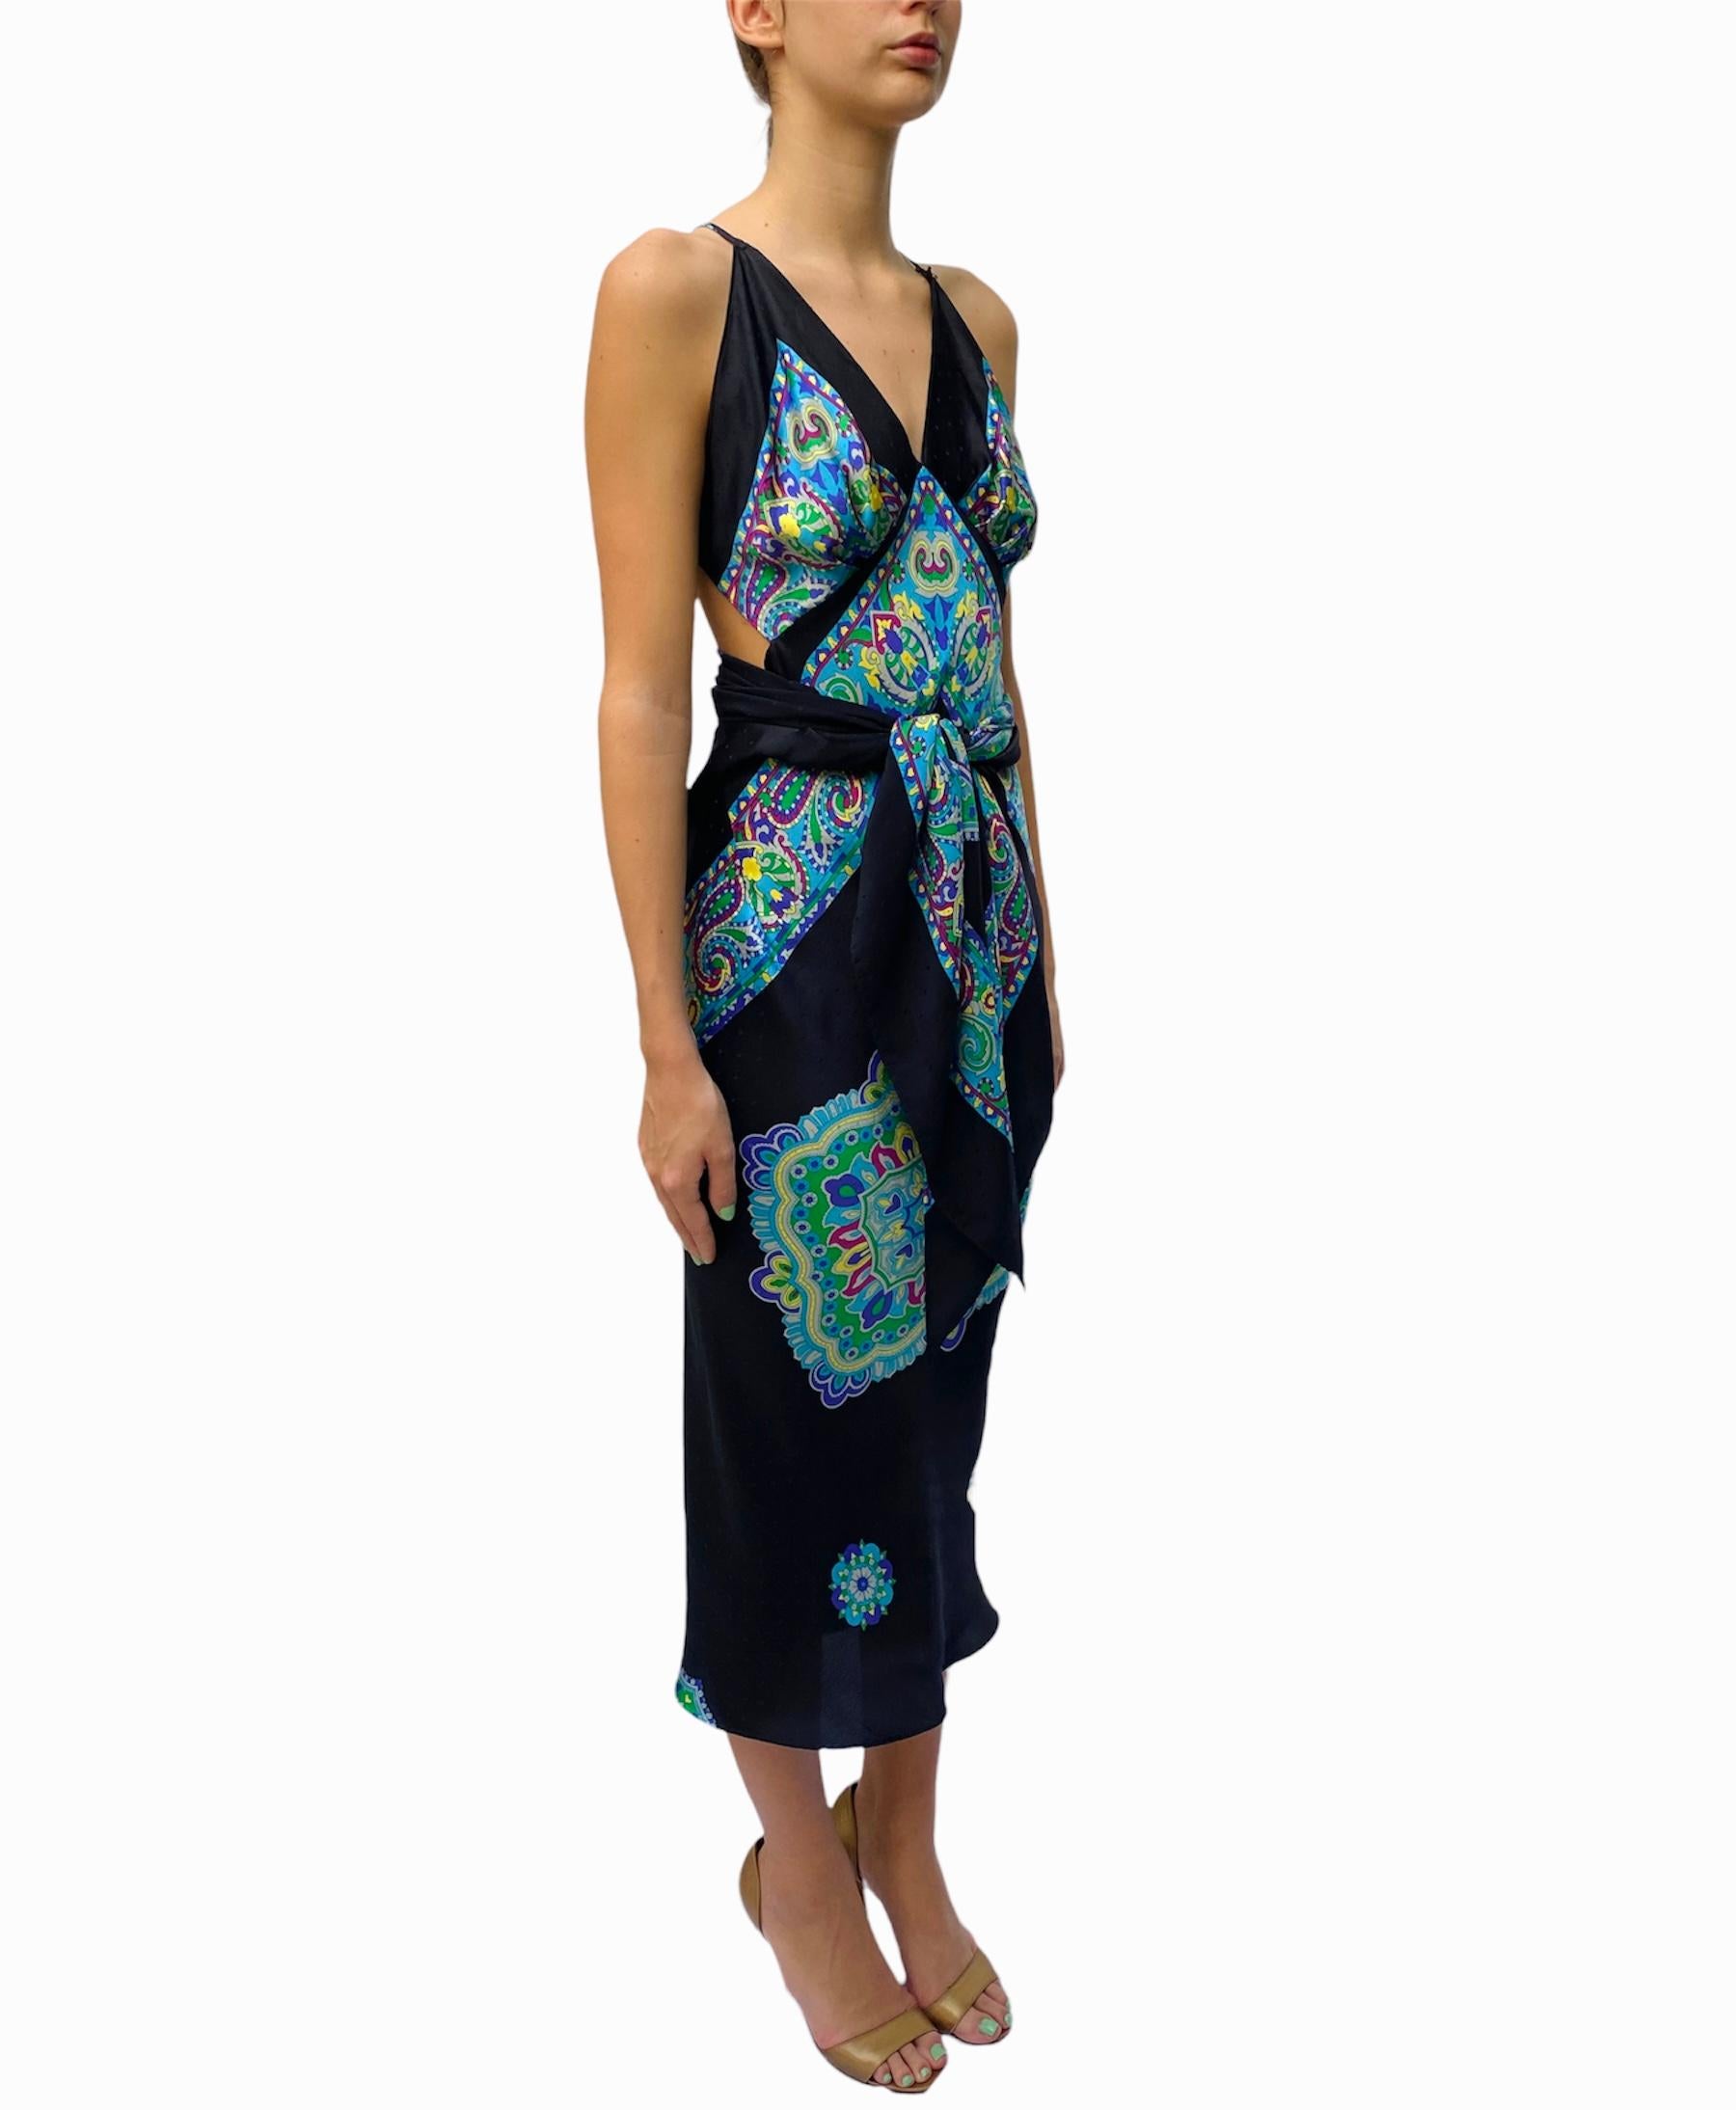 Morphew Collection Black & Blue Multicolored Silk Twill Print Scarf Dress Made  For Sale 3